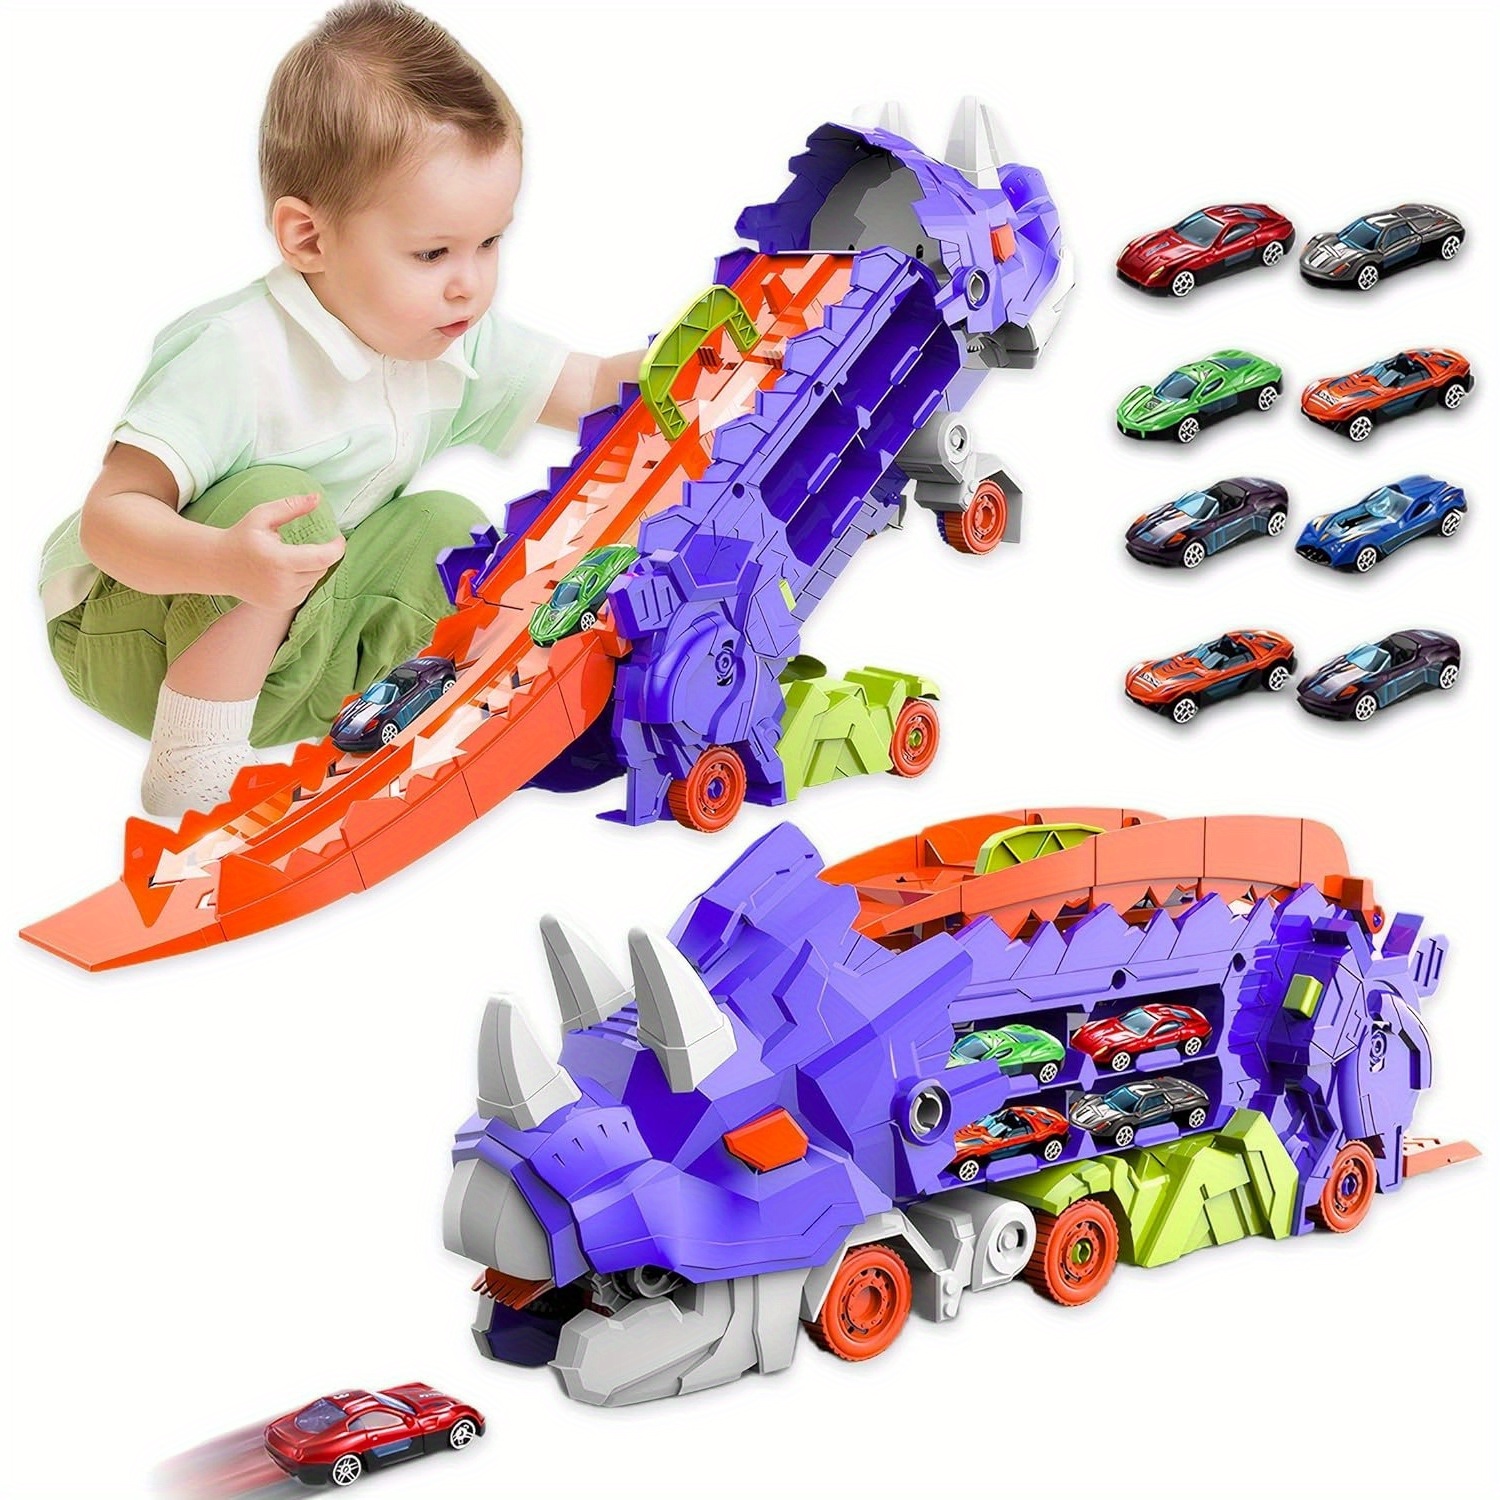 

Inmoredo Dinosaur Transporter & Sliding Race Track Set With 2 Cars - Perfect For Kids Ages 3-6, Manual Operation, No Batteries Required (purple)